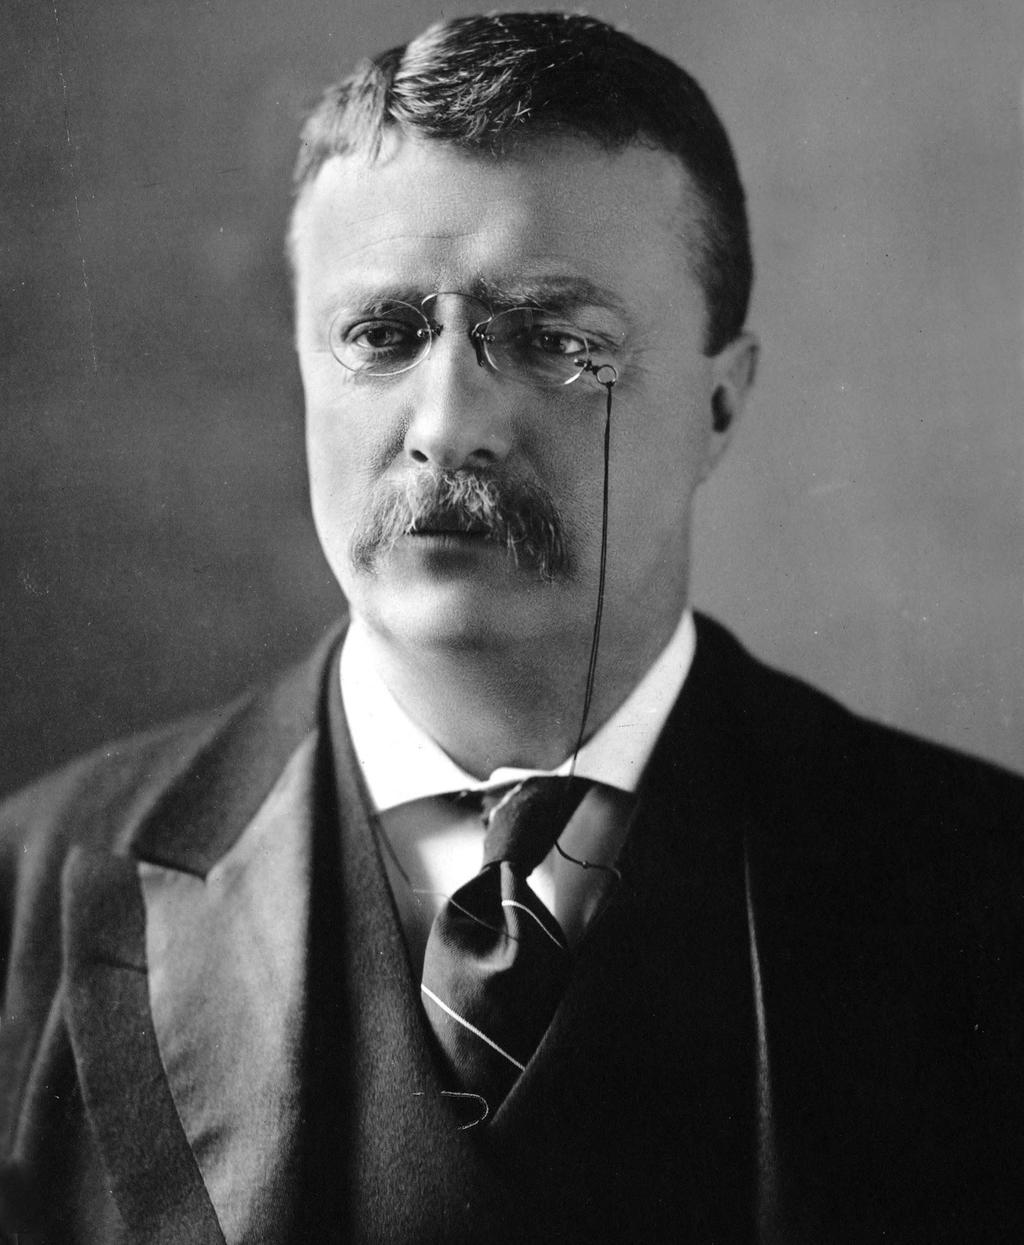 Governor Theodore Roosevelt Reforms took place at the state level puts public